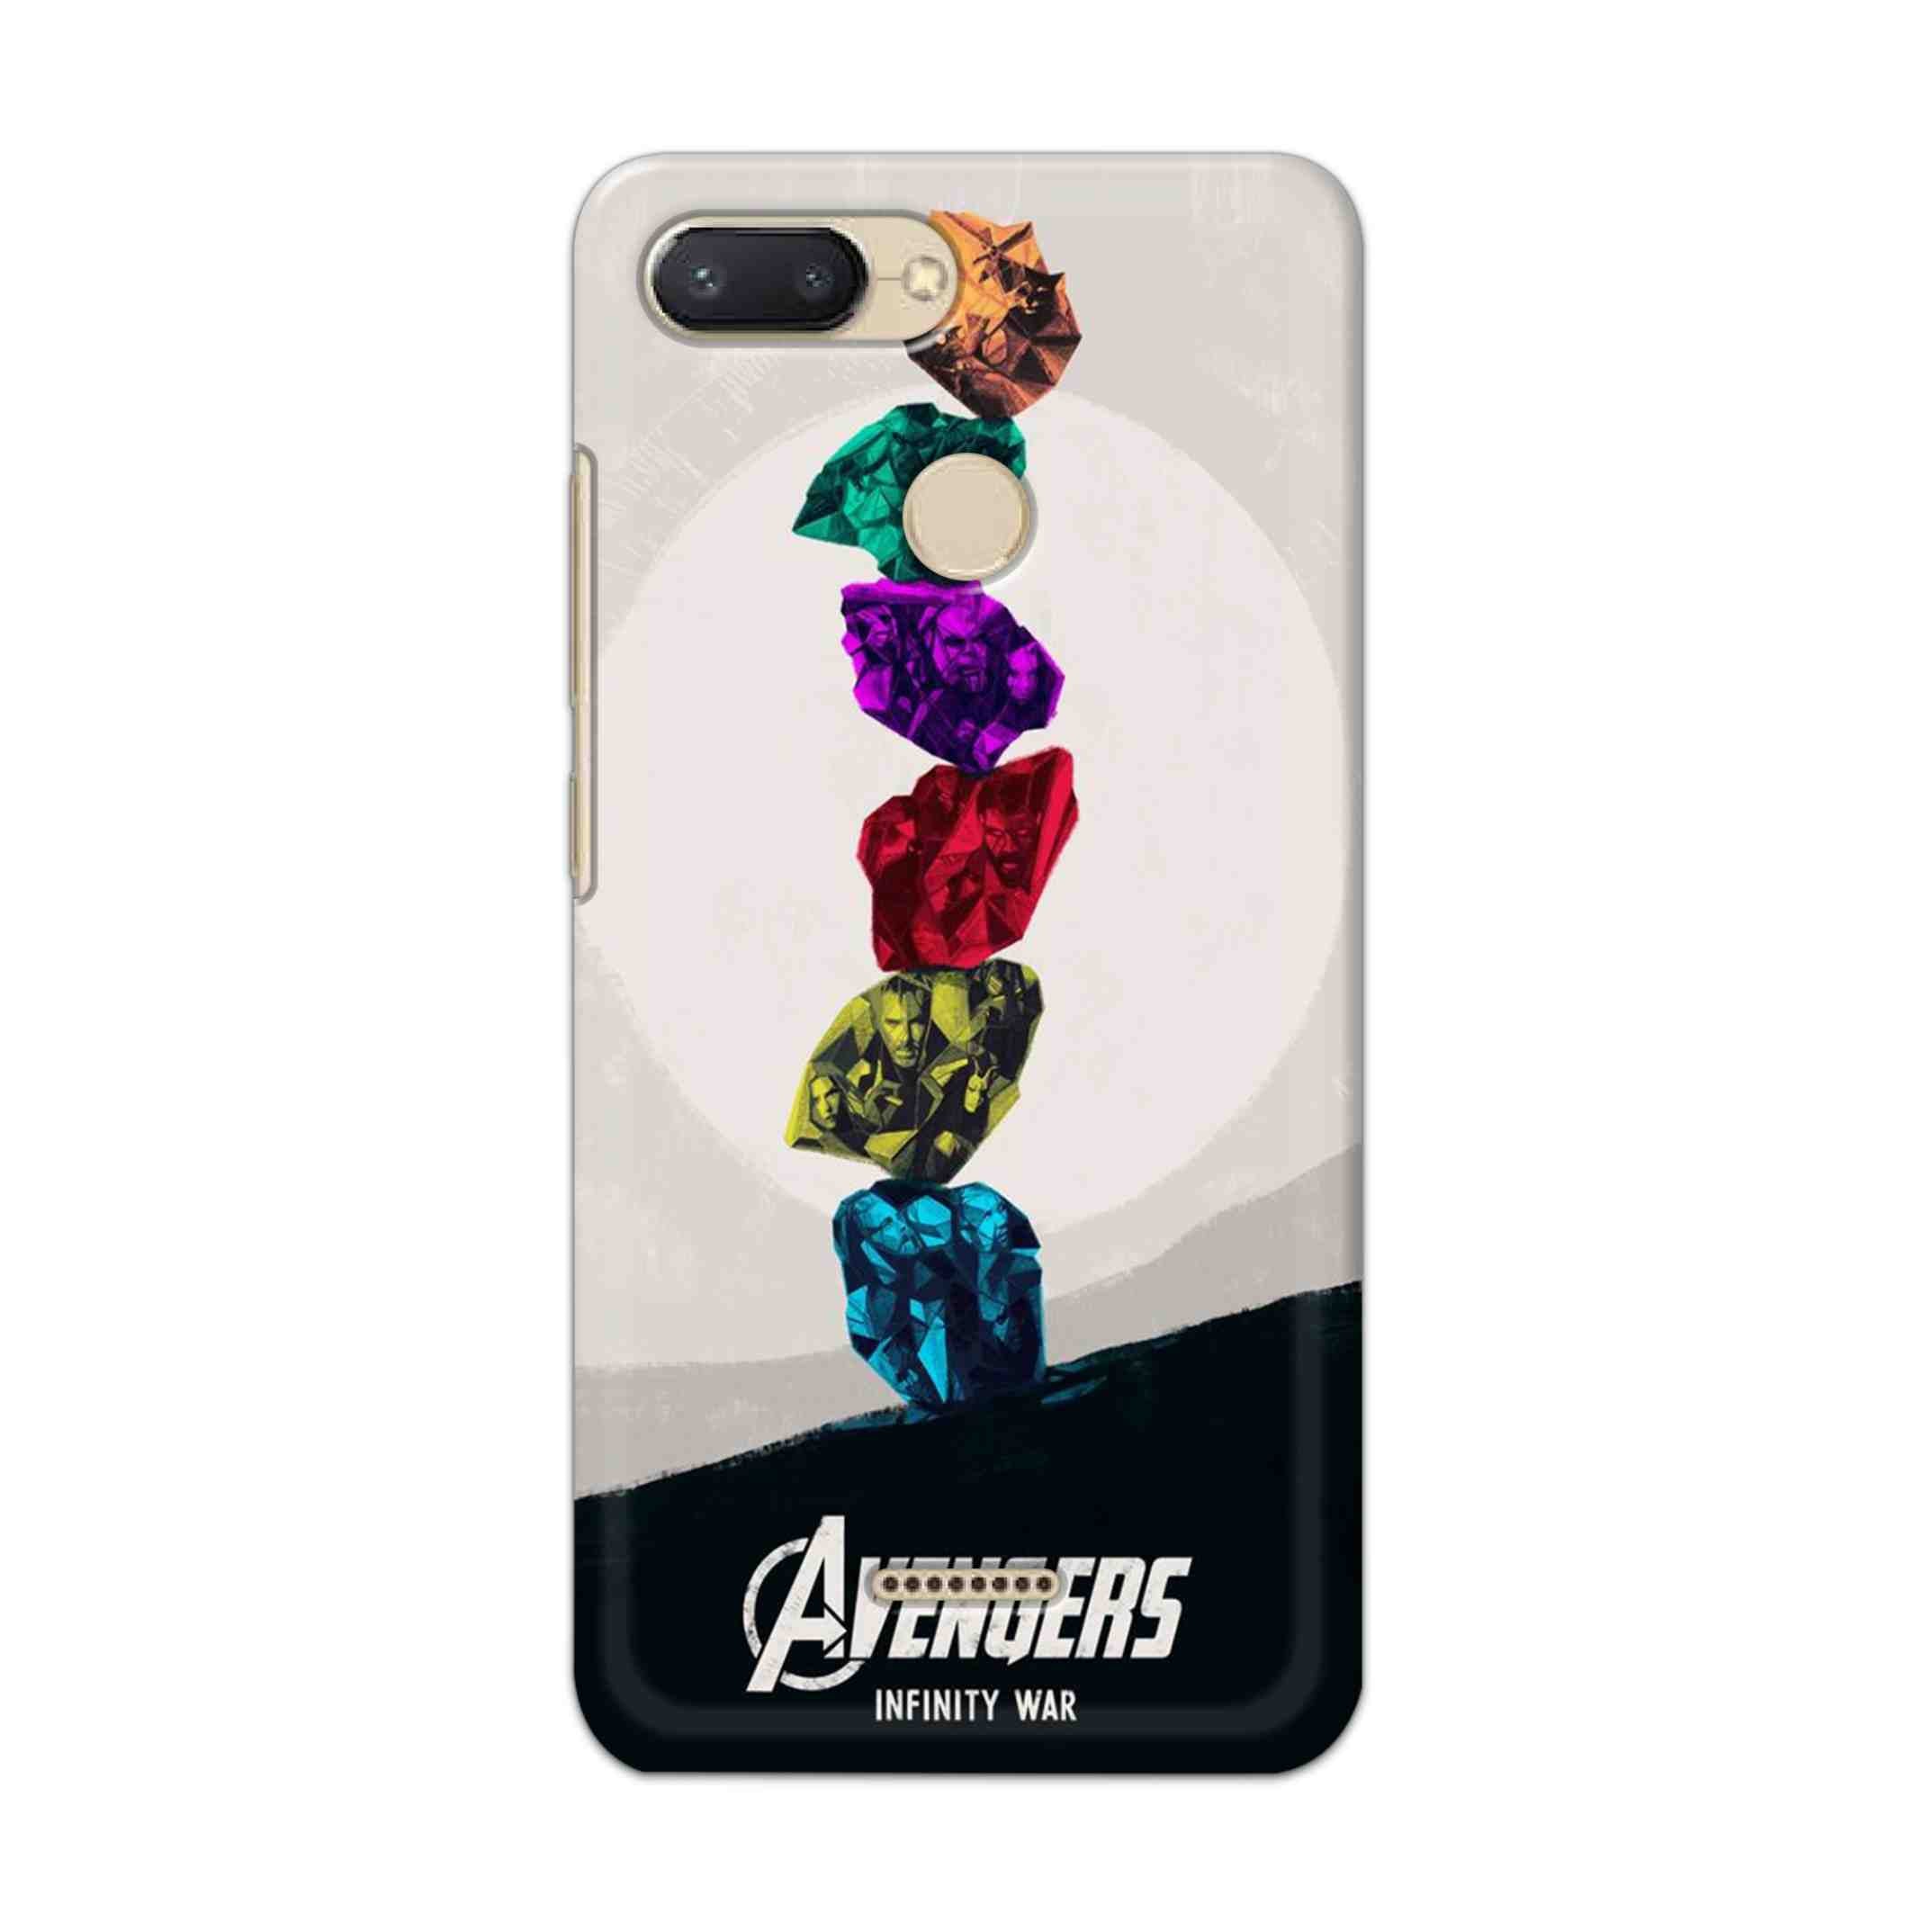 Buy Avengers Stone Hard Back Mobile Phone Case/Cover For Xiaomi Redmi 6 Online